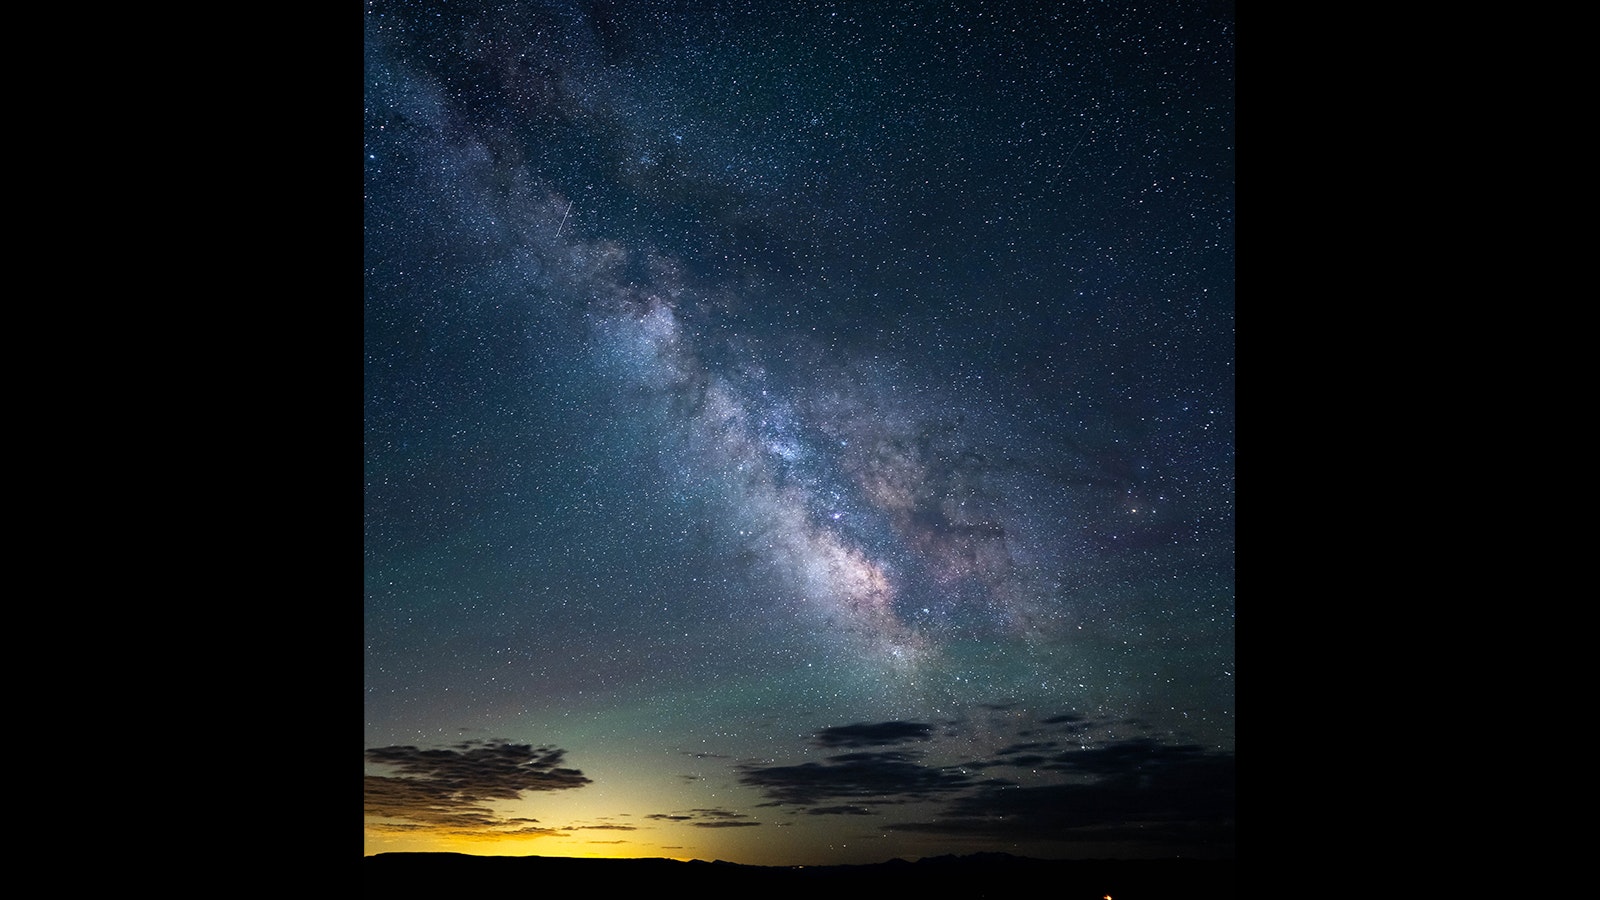 Night sky enthusiast Chris Mickey of Cheyenne recently took this photo of the Milky Way from his campsite atop Jelm Mountain.